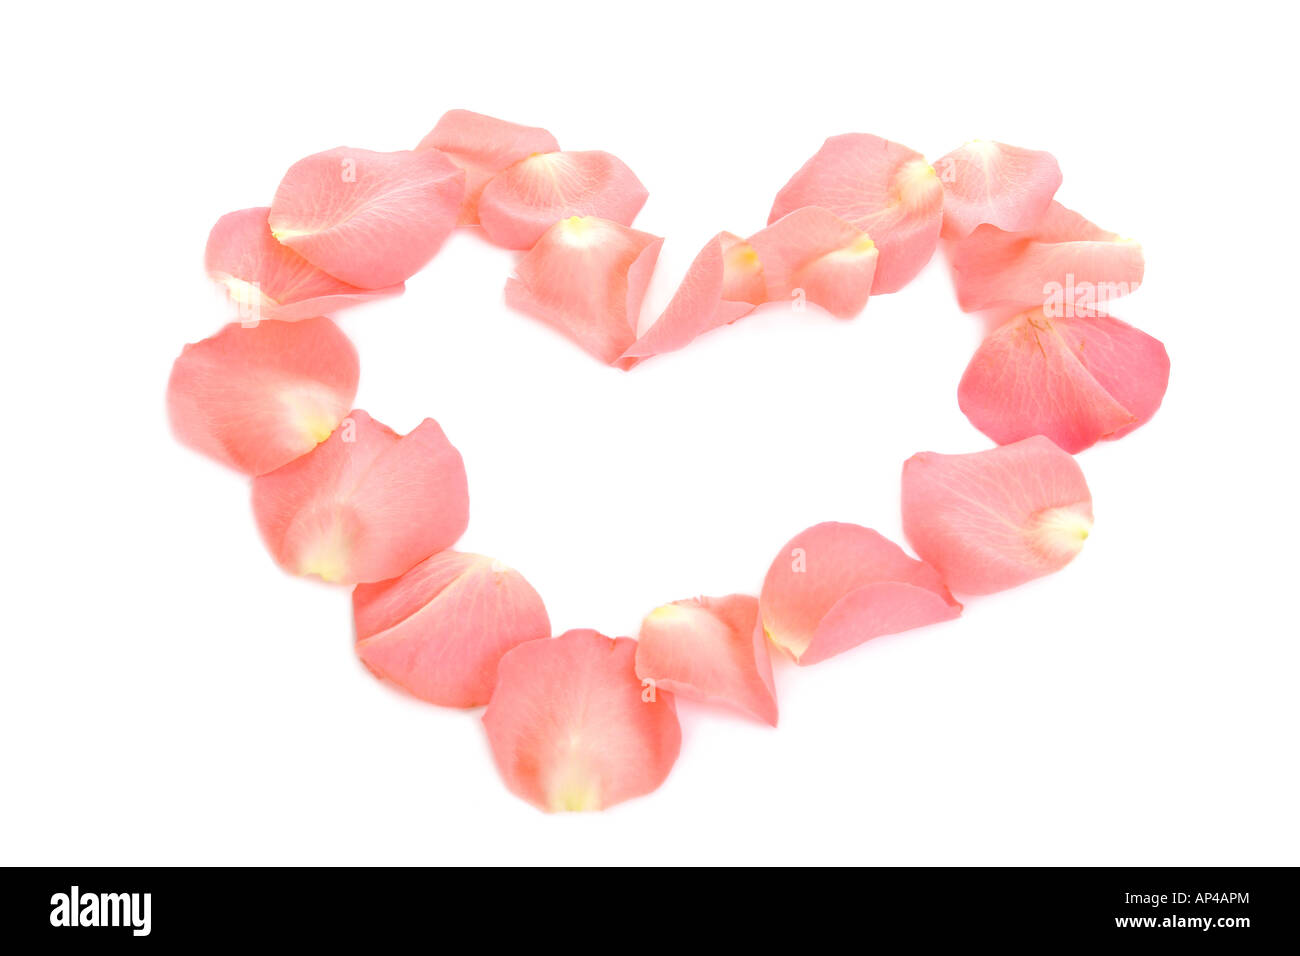 Heart shape made of pink rose petals over white background Stock Photo